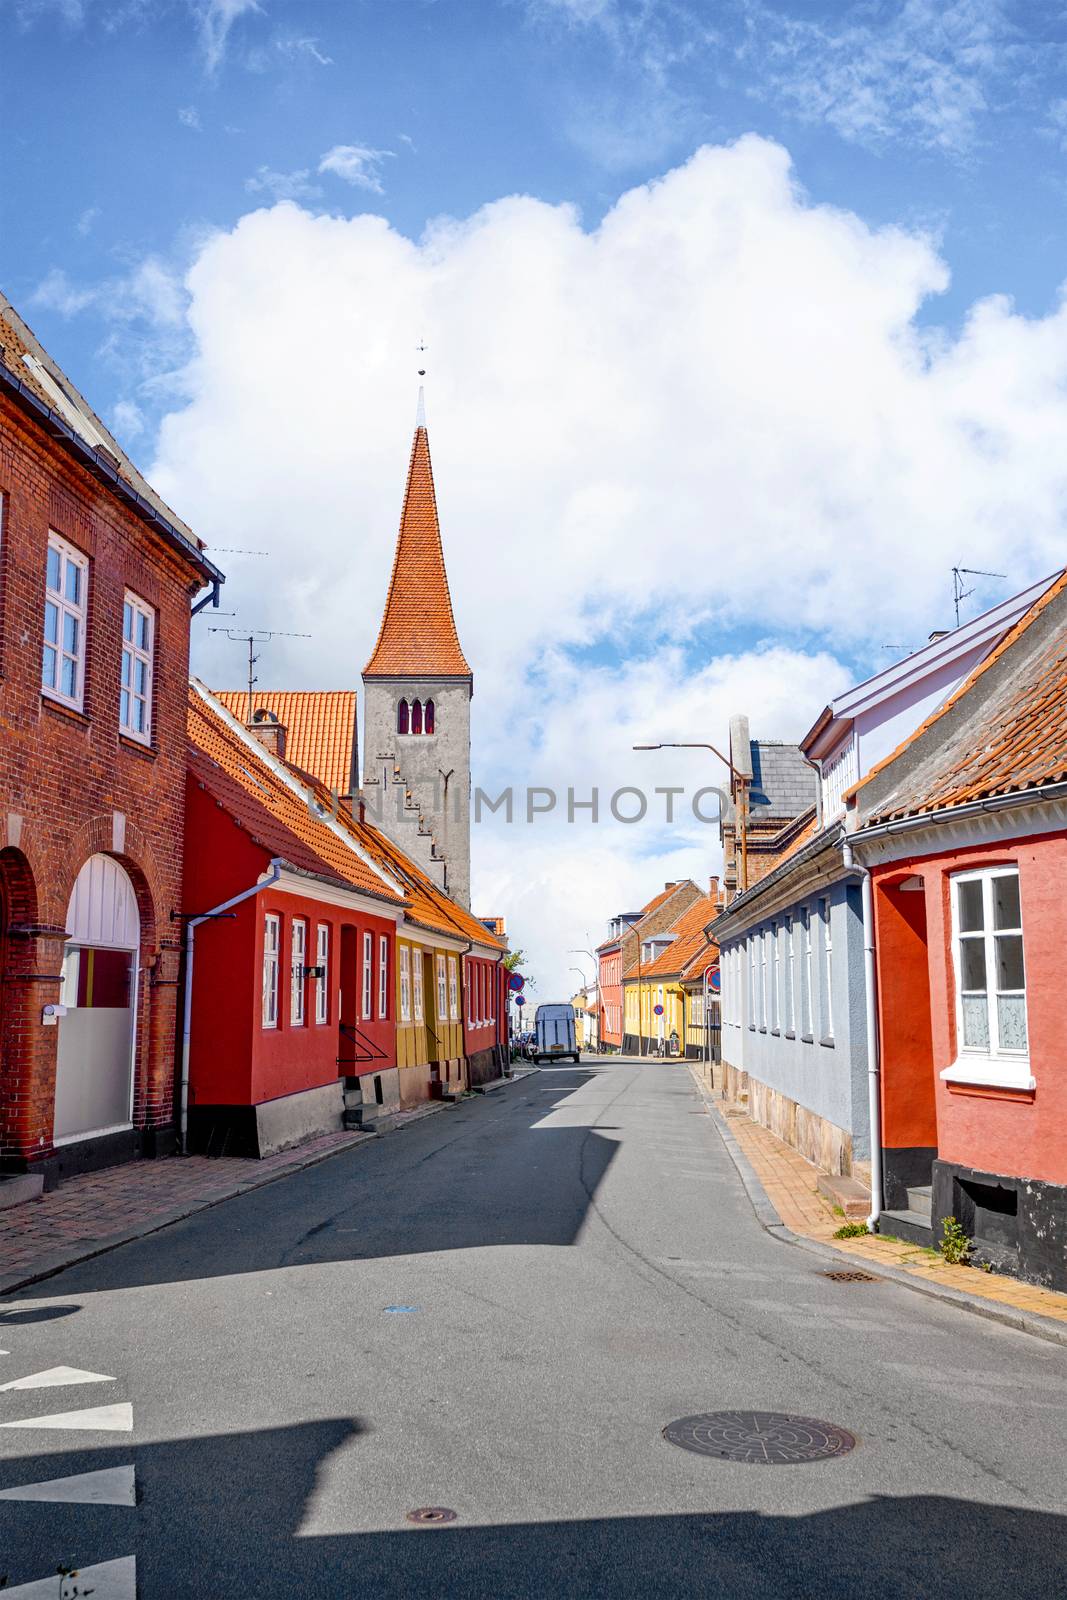 Village with a church in Denmark by Sportactive